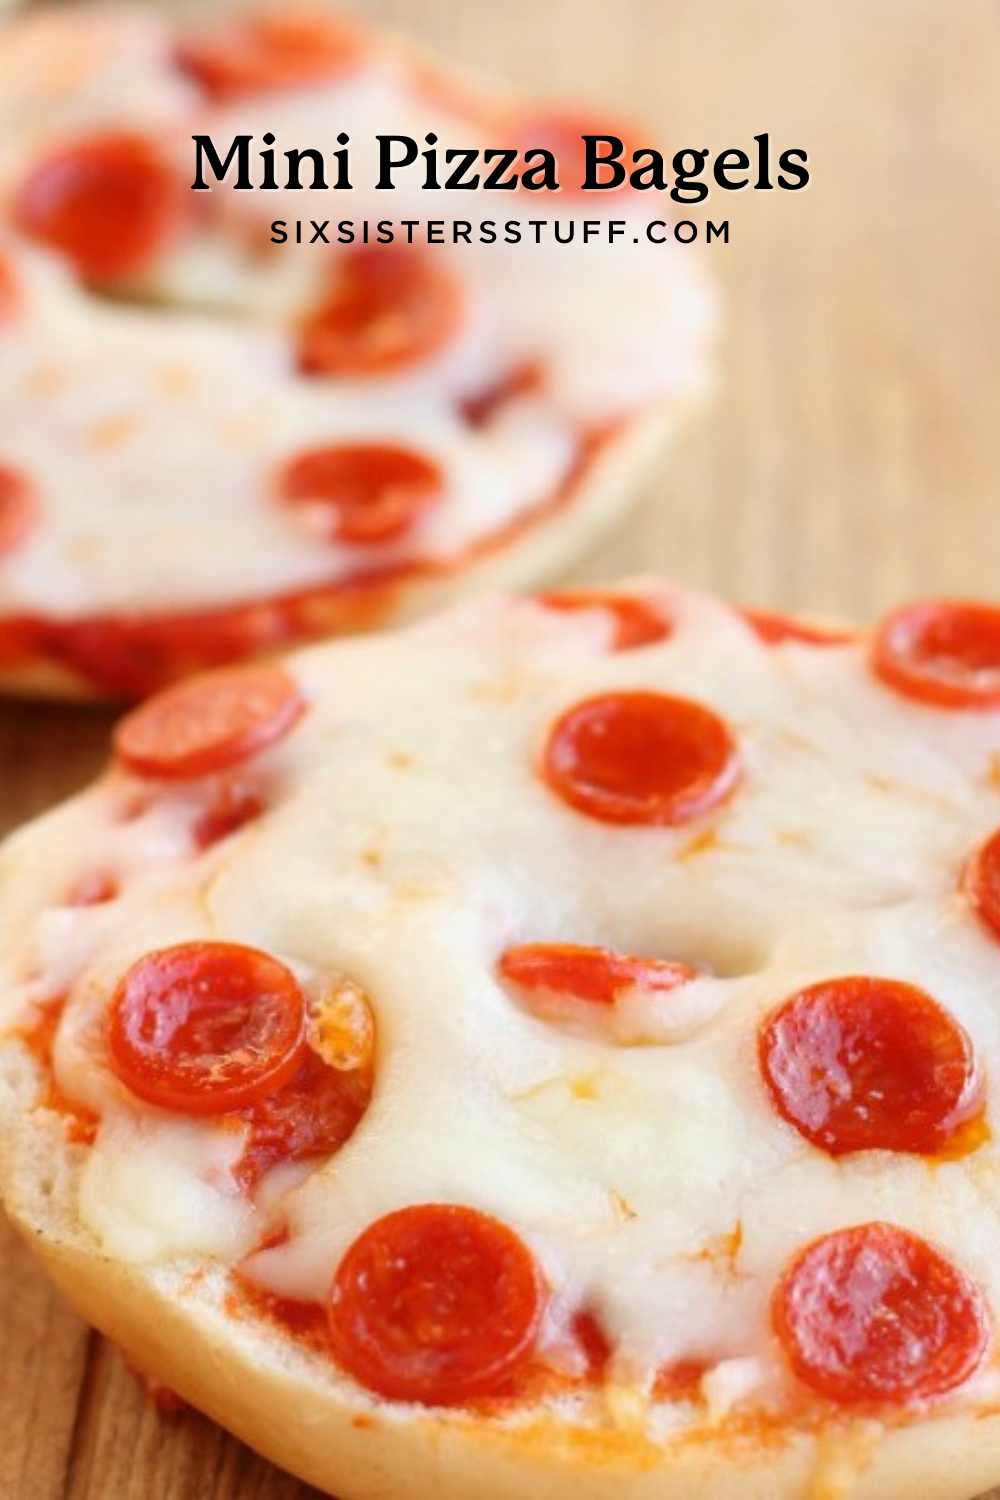 mini pizza bagels with pepperoni's on top on a wooden cutting board